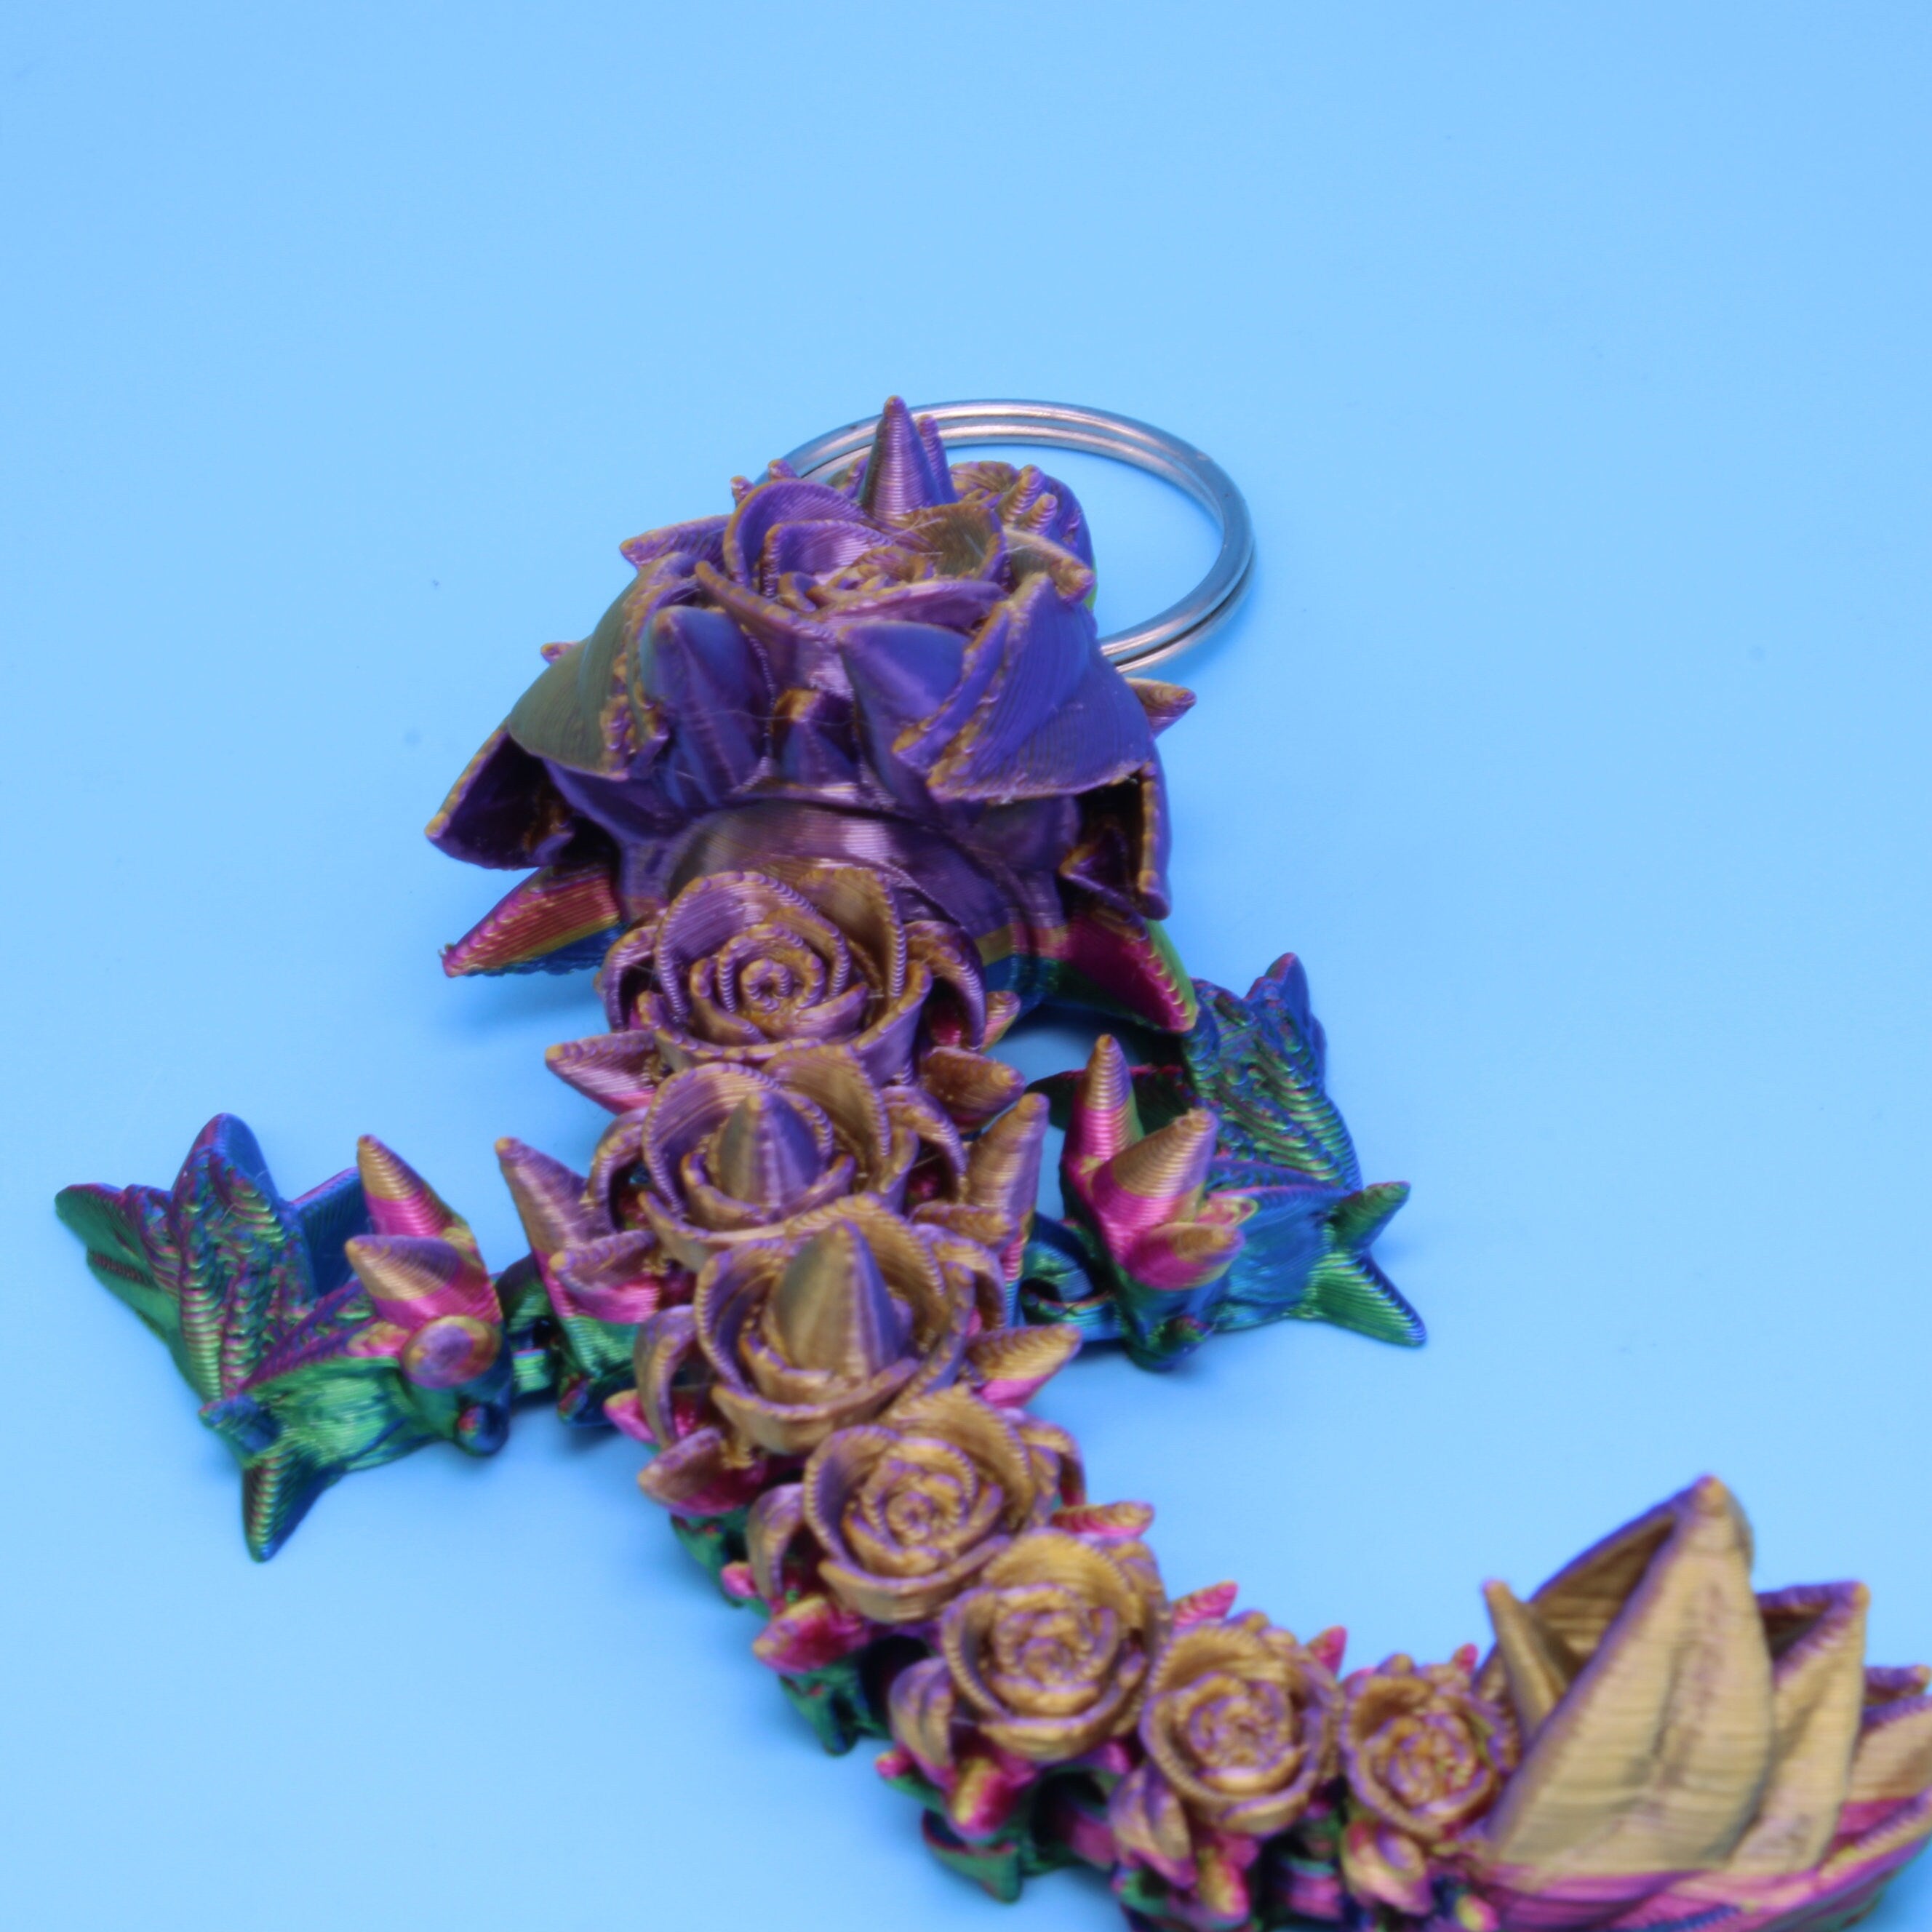 Baby Rose Dragon- Limited Edition Tadling Keychain | 3D Printed | 4.75 inches